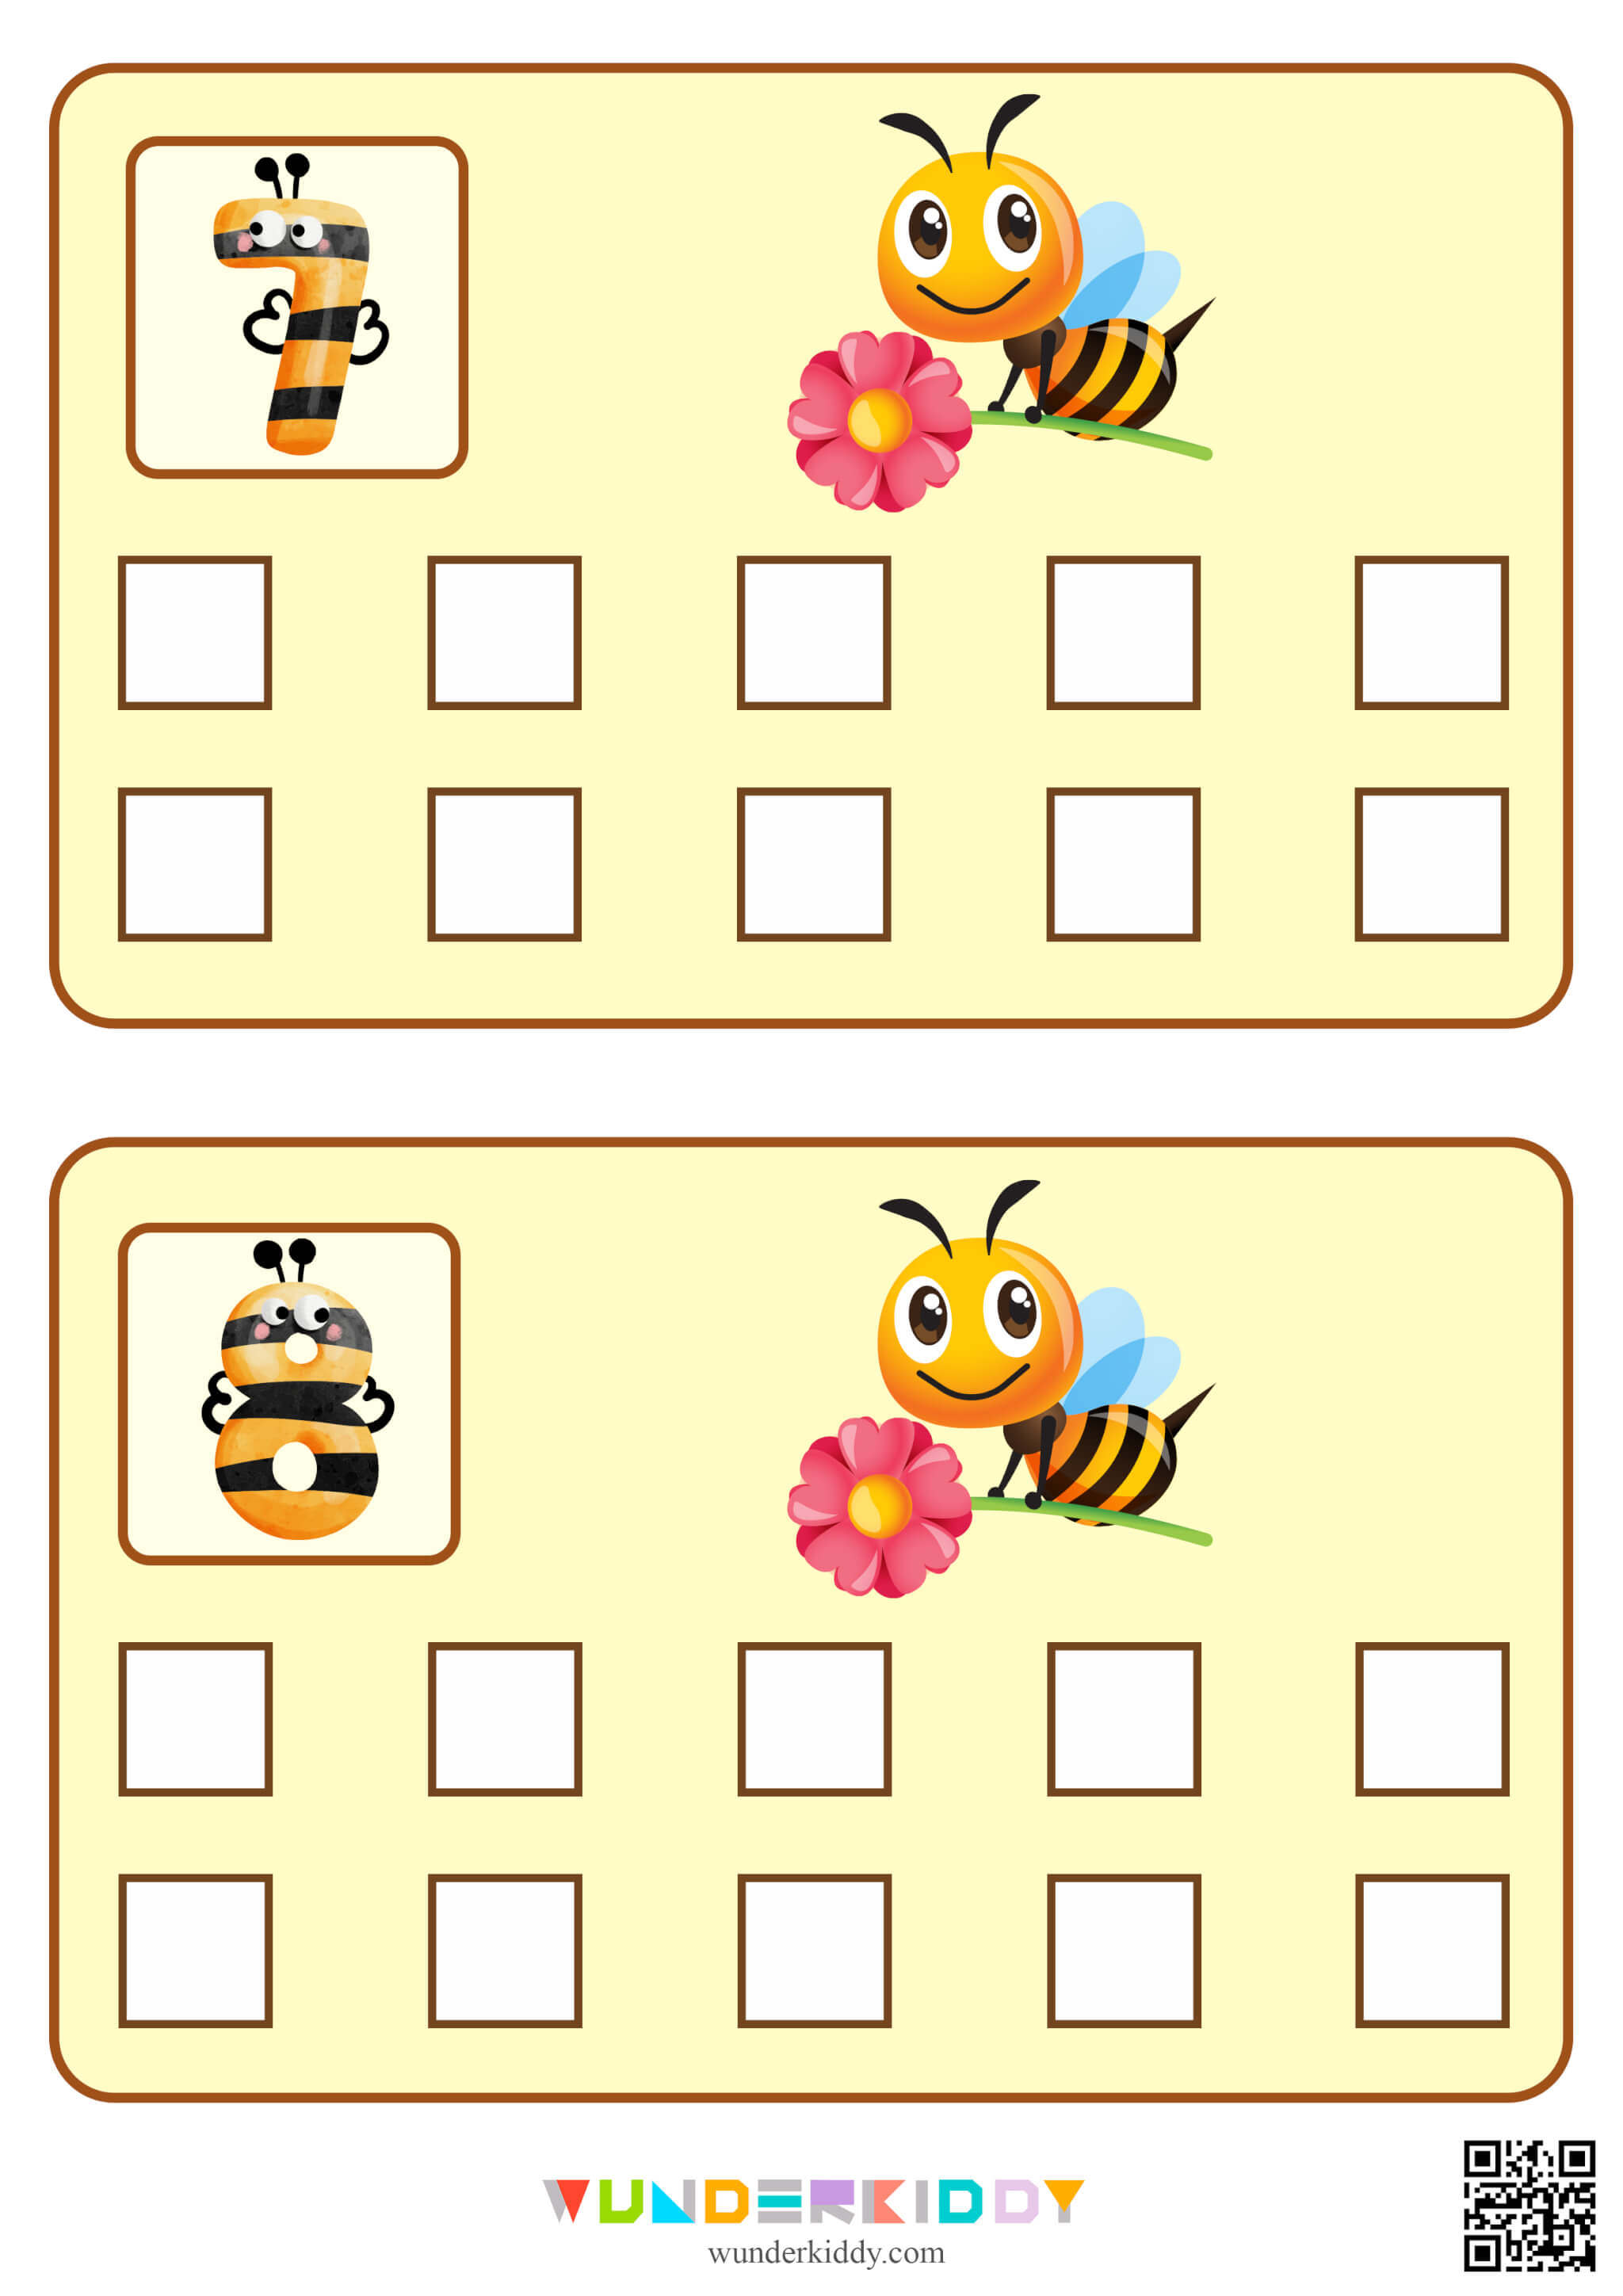 Worksheets «Counting bees» - Image 5